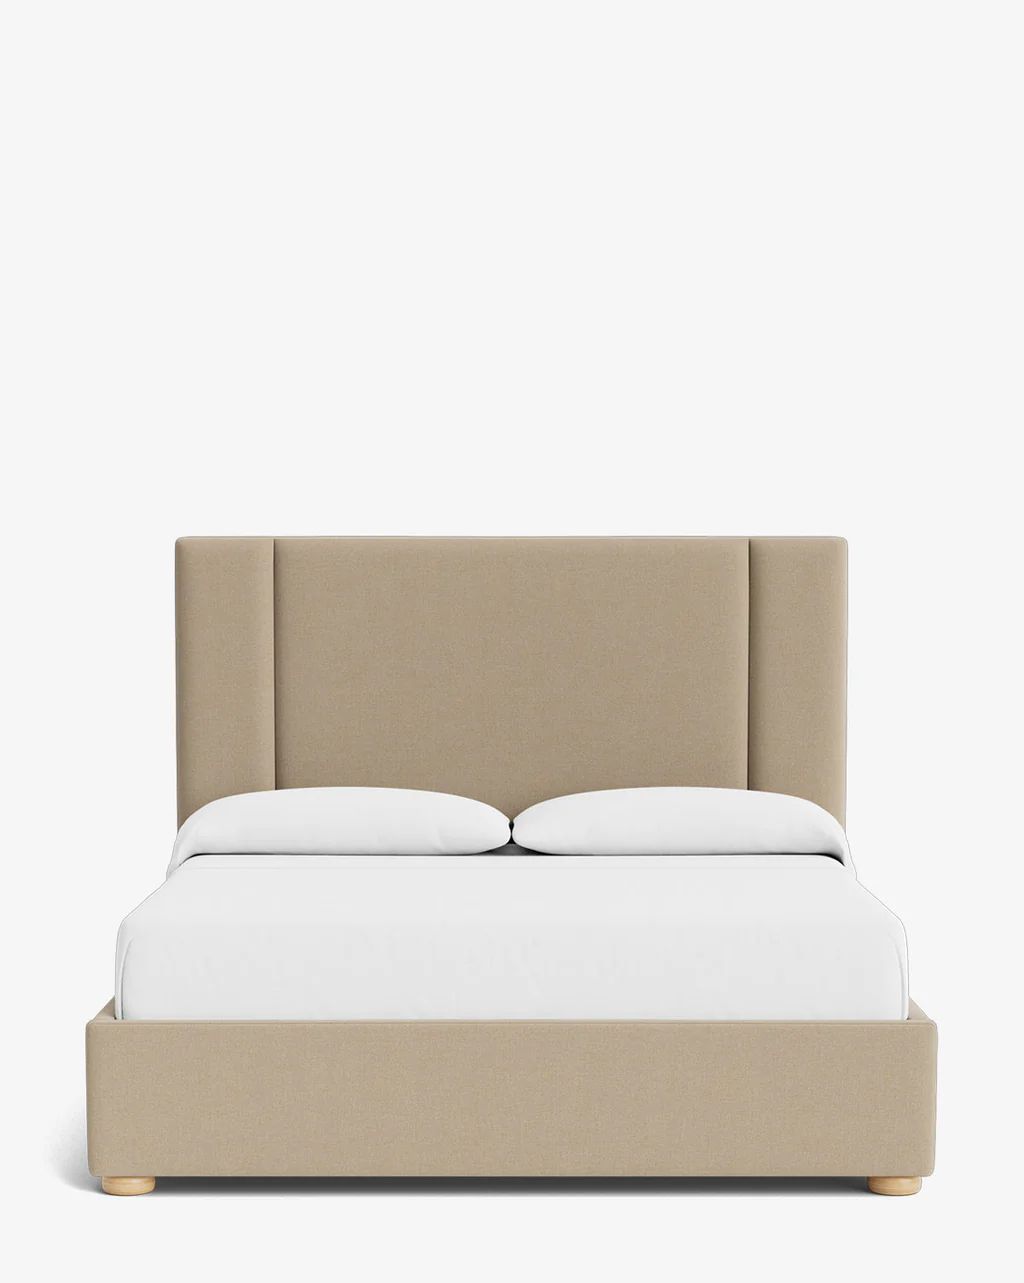 Mina Upholstered Bed (Ready to Ship) | McGee & Co.